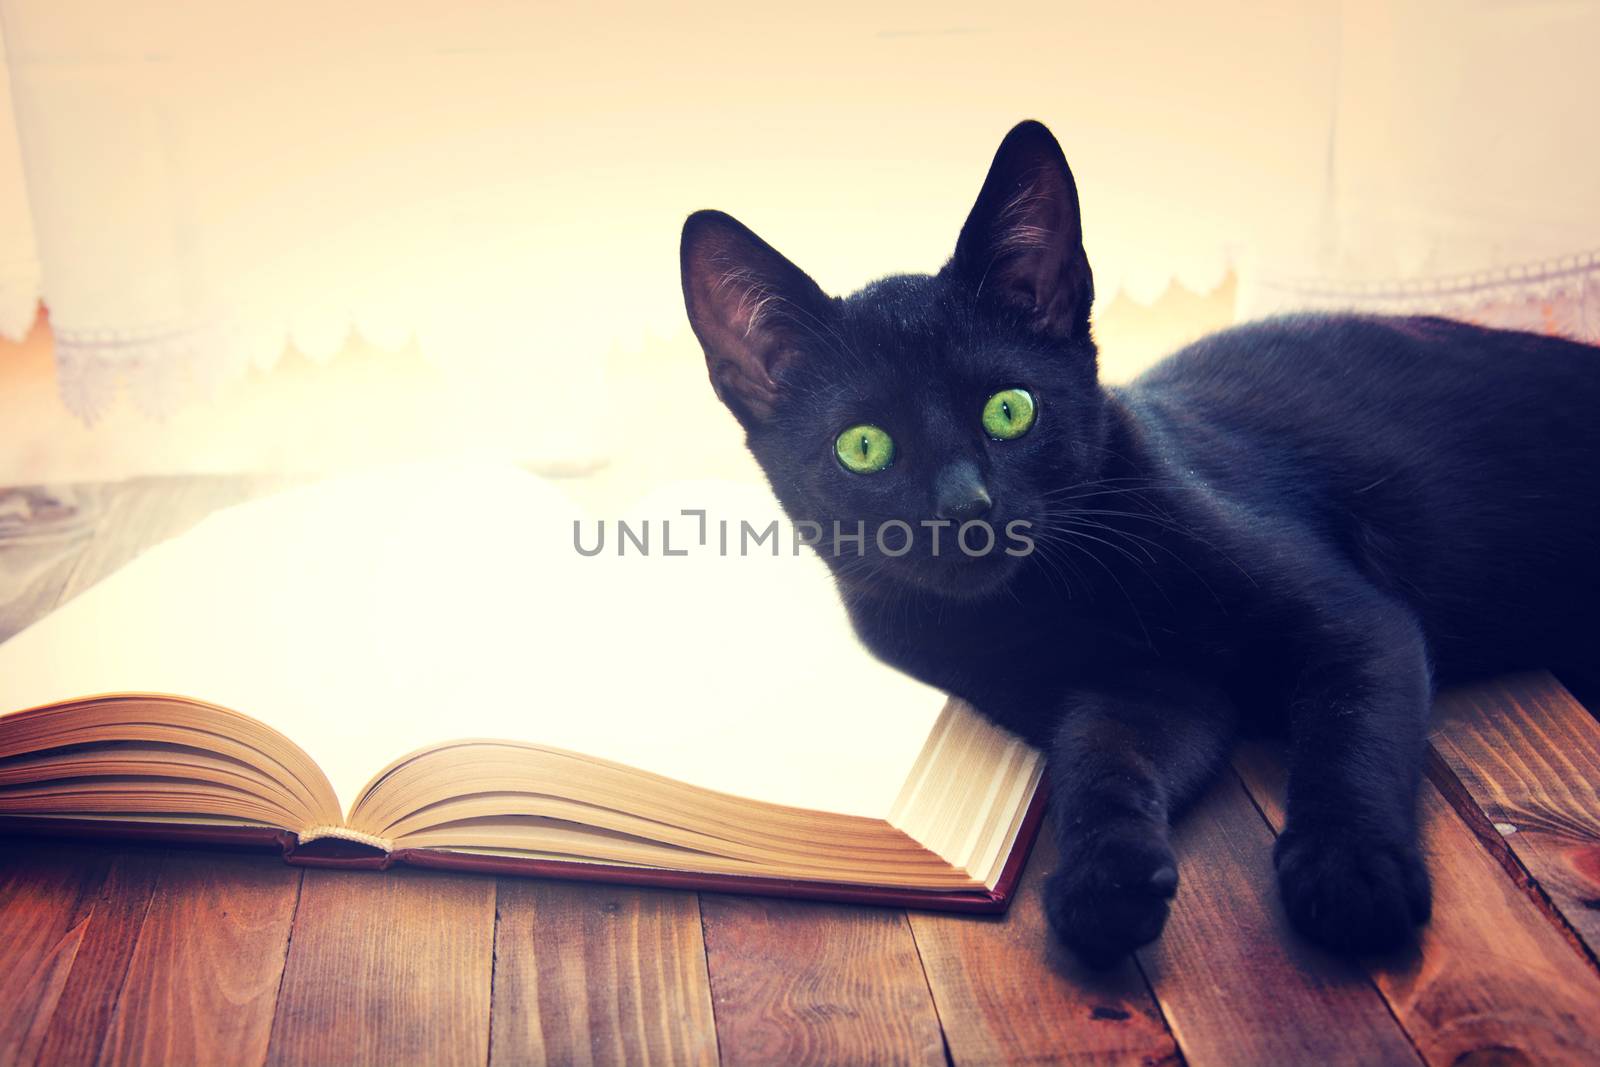 Open book and black cat on wooden table. Knowledge and education conceptual image.